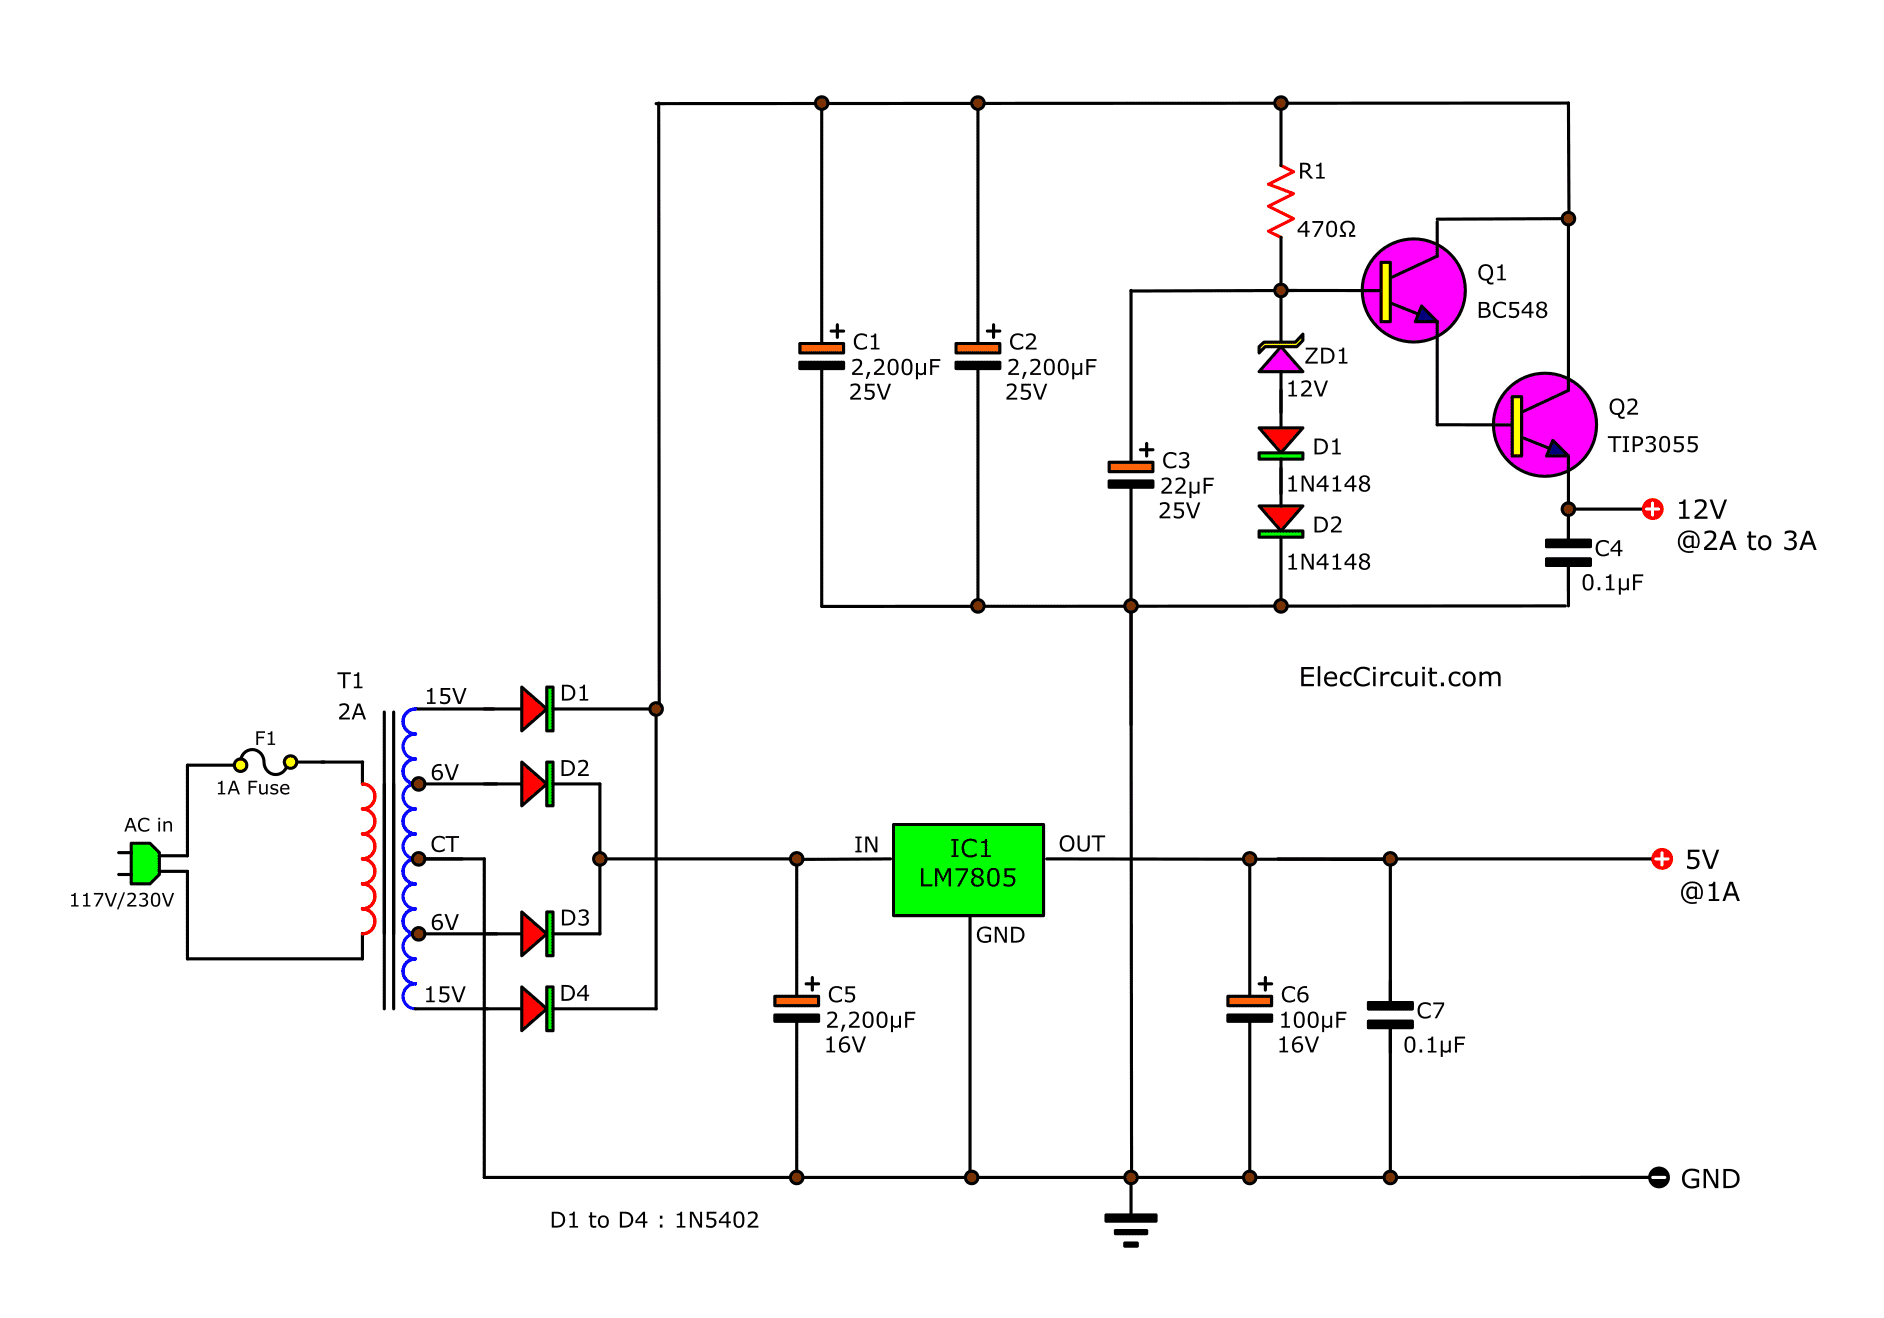 5V and 12V power supply - ElecCircuit - Electronic circuit